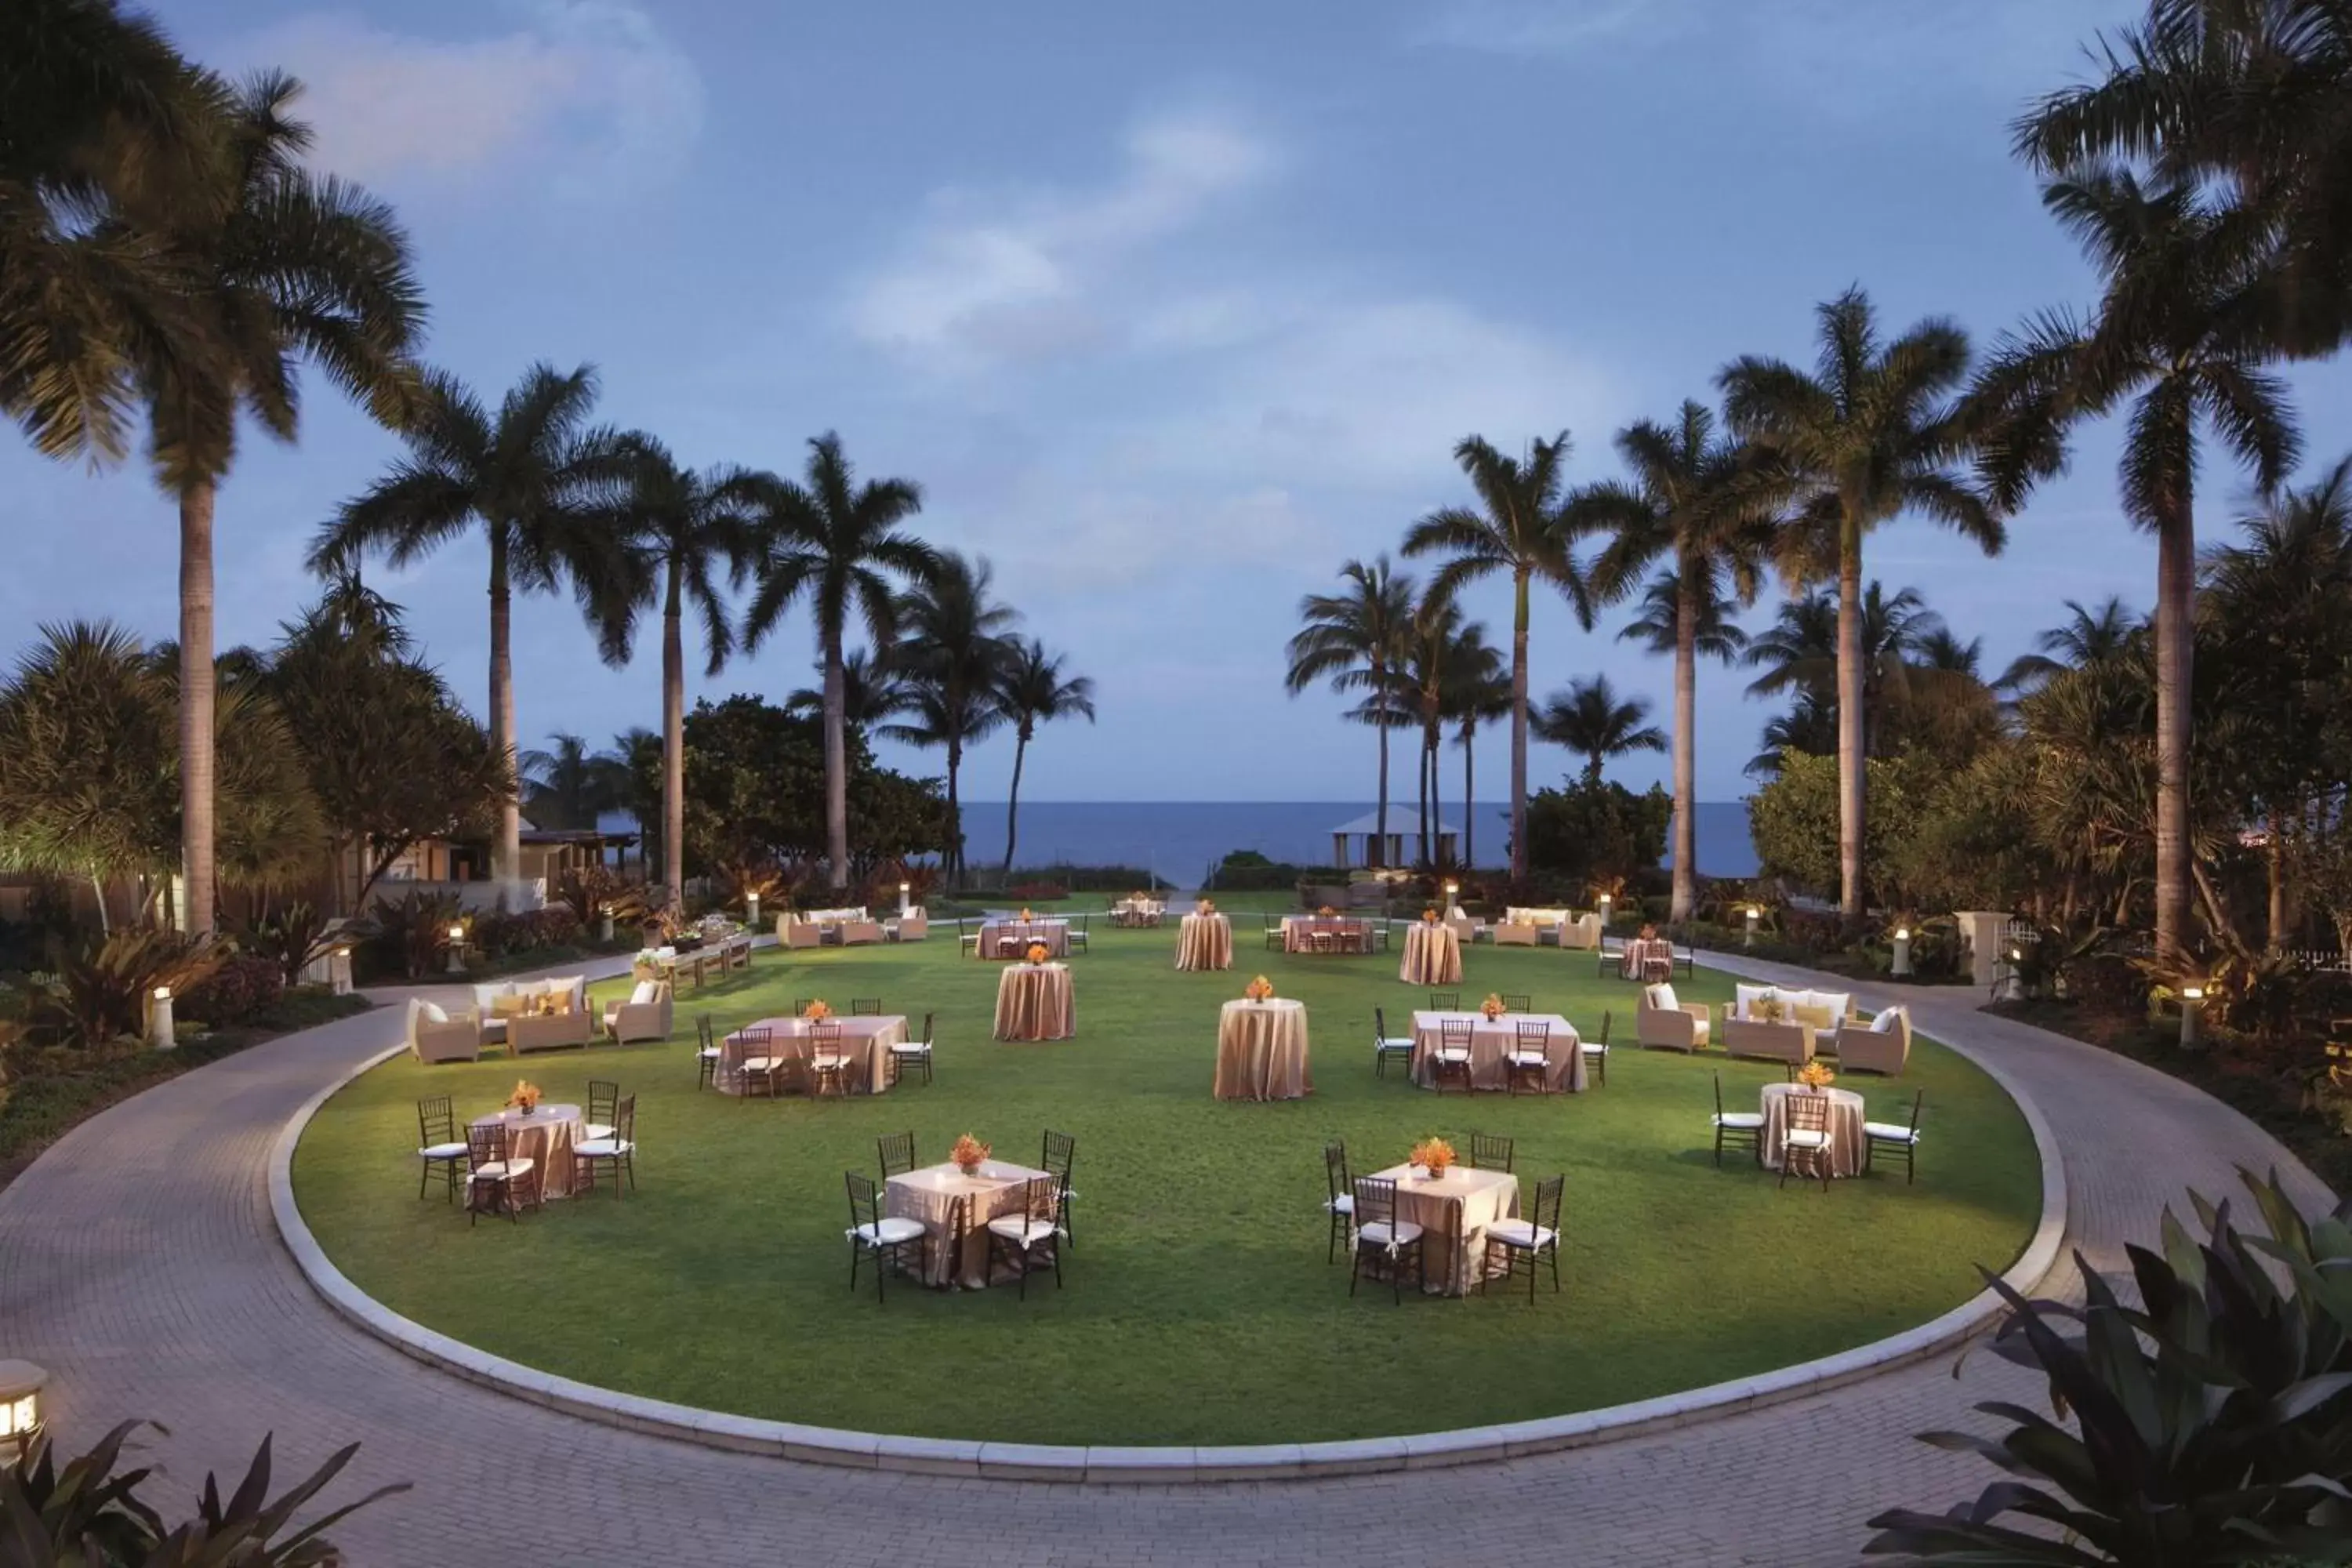 Banquet/Function facilities in The Ritz Carlton Key Biscayne, Miami